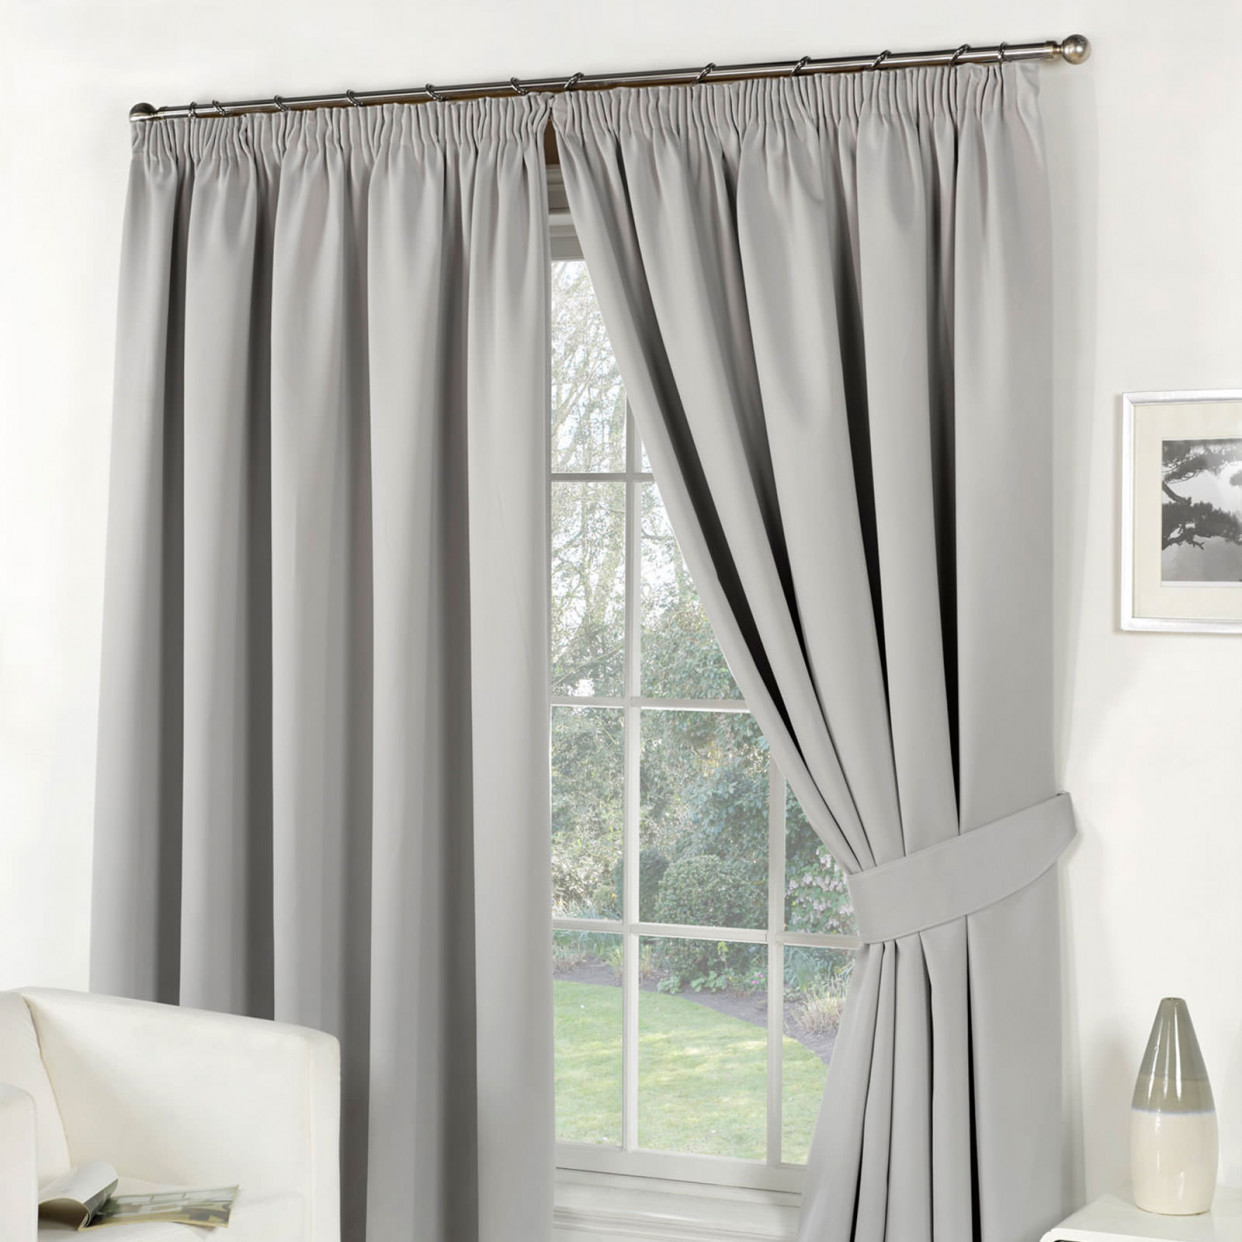 Thermal Pencil Pleat Blackout PAIR Curtains Ready Made Fully Lined Silver 66x72>